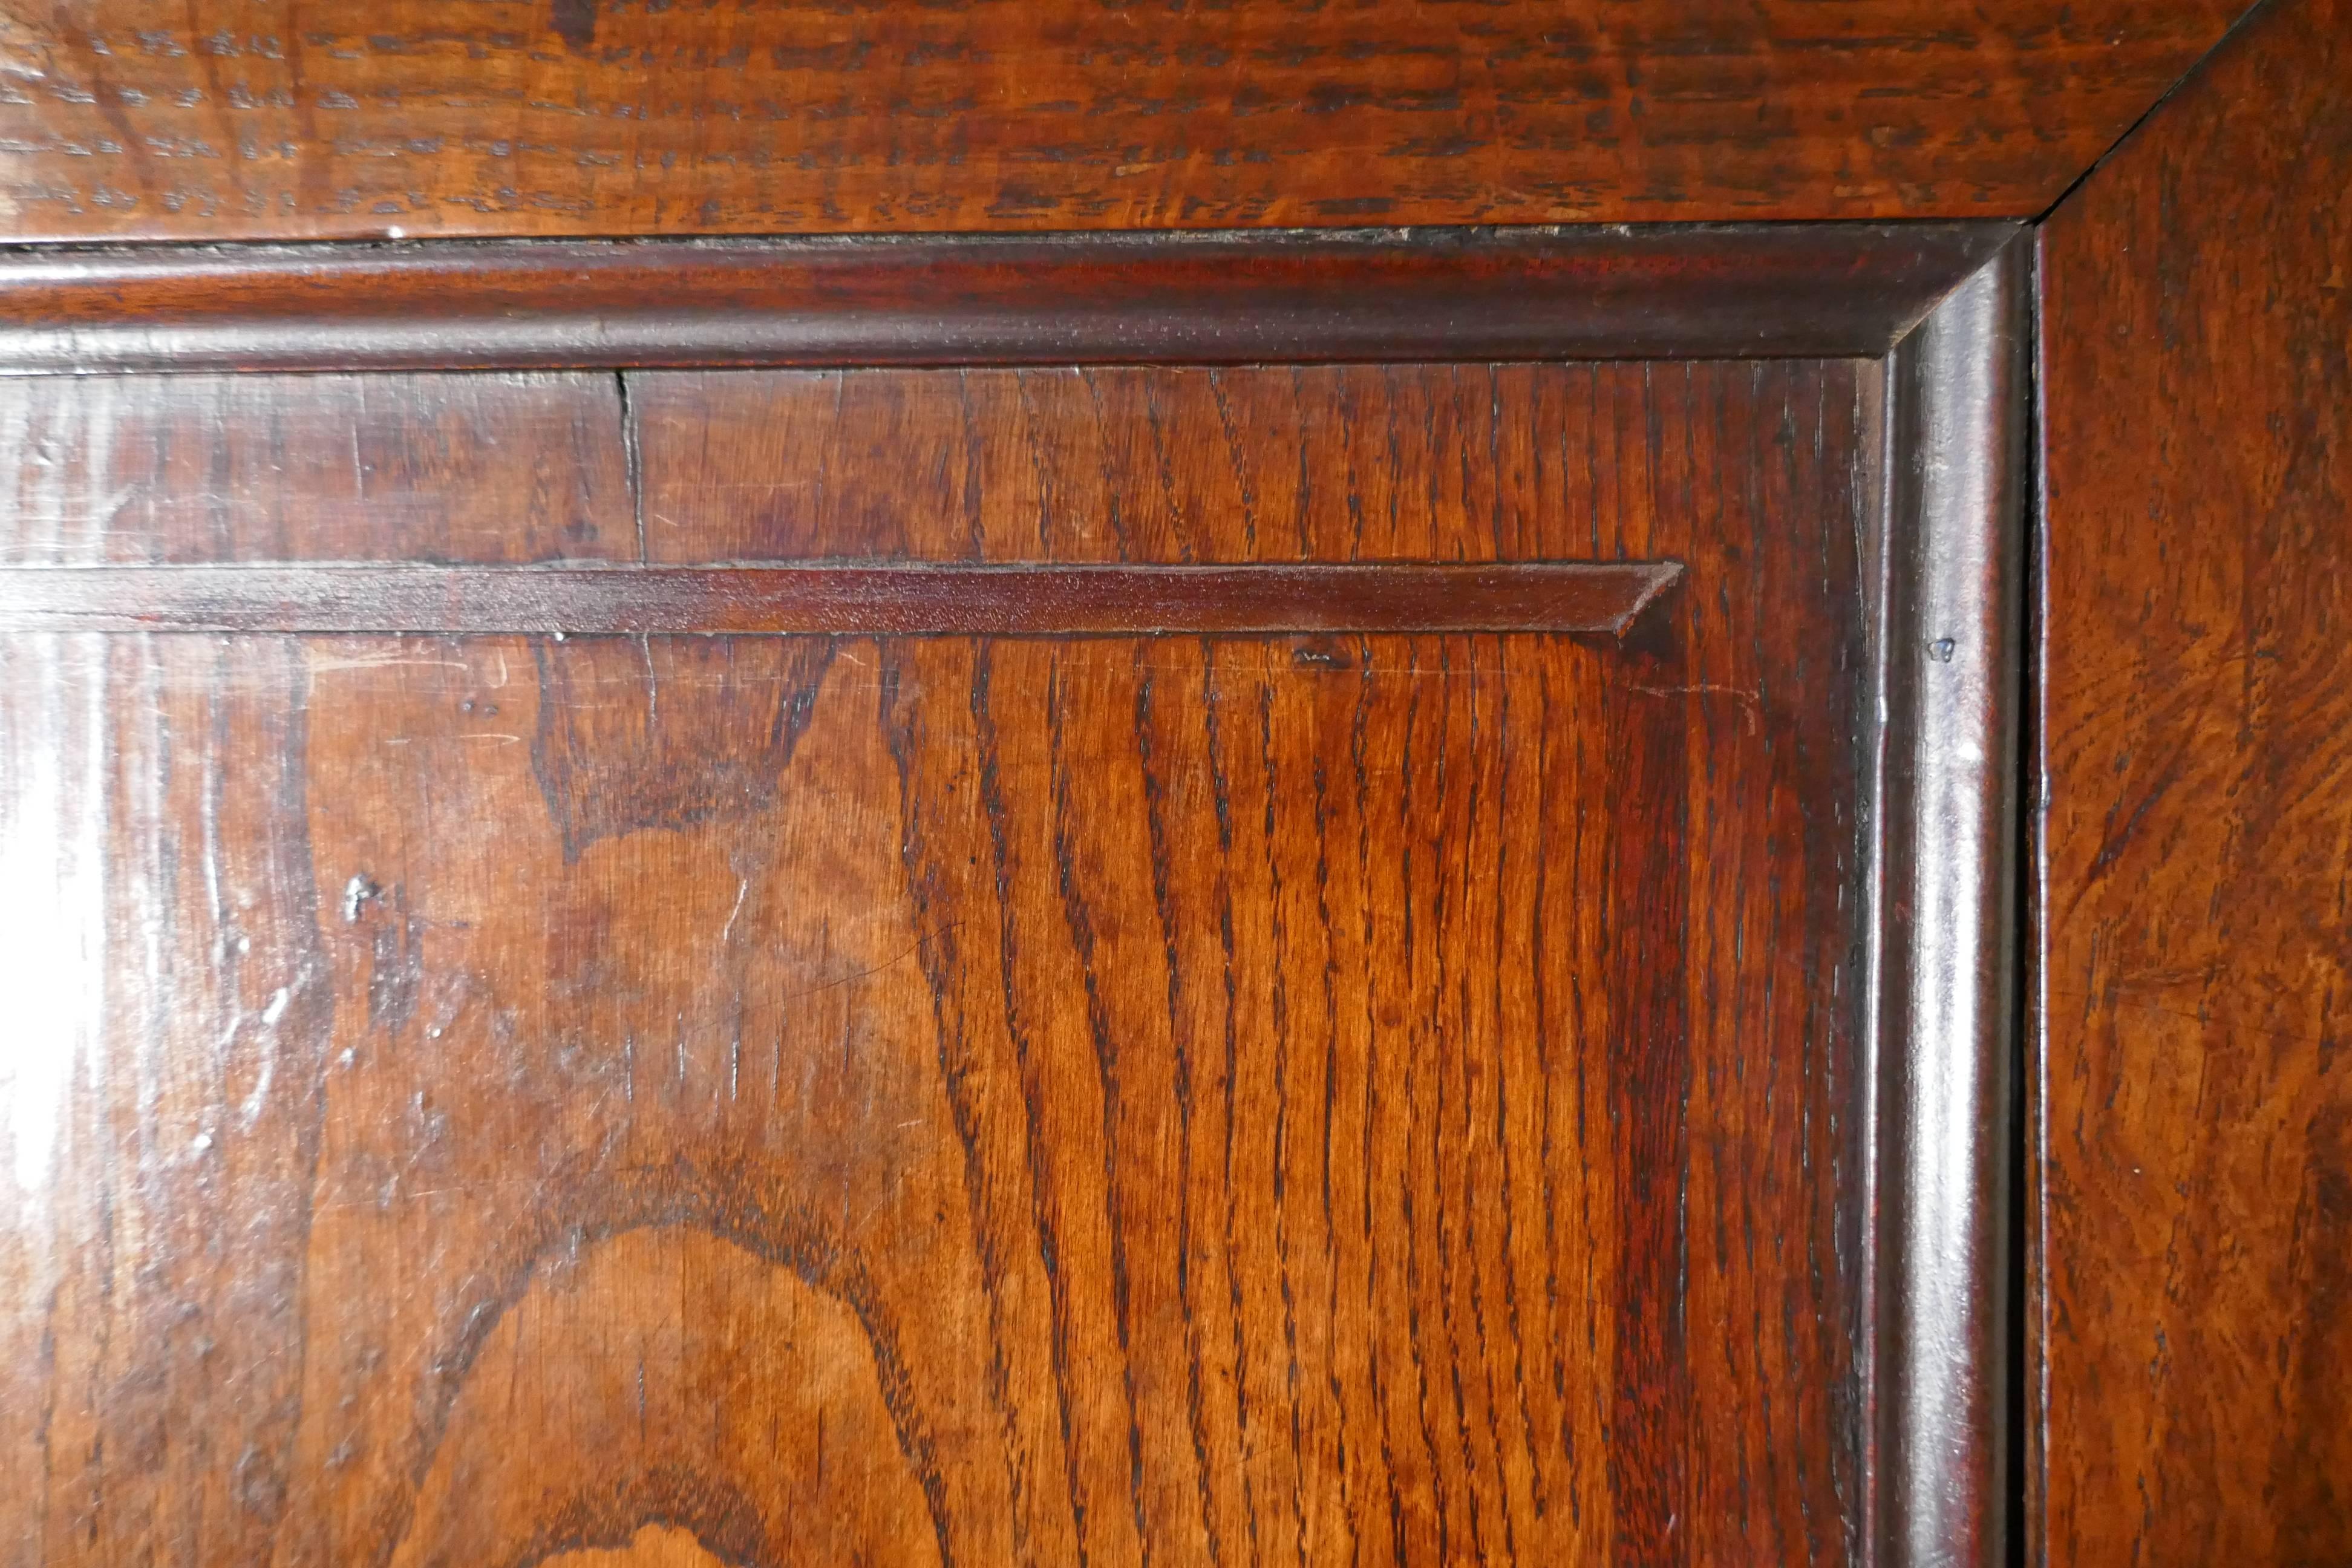 Georgian inlaid oak housekeepers or cloakroom hanging cupboard

The cupboard has two large doors enclosing a deep hanging cupboard, below the doors on the front there are two dummy allowing extra hanging length and three other drawers
The